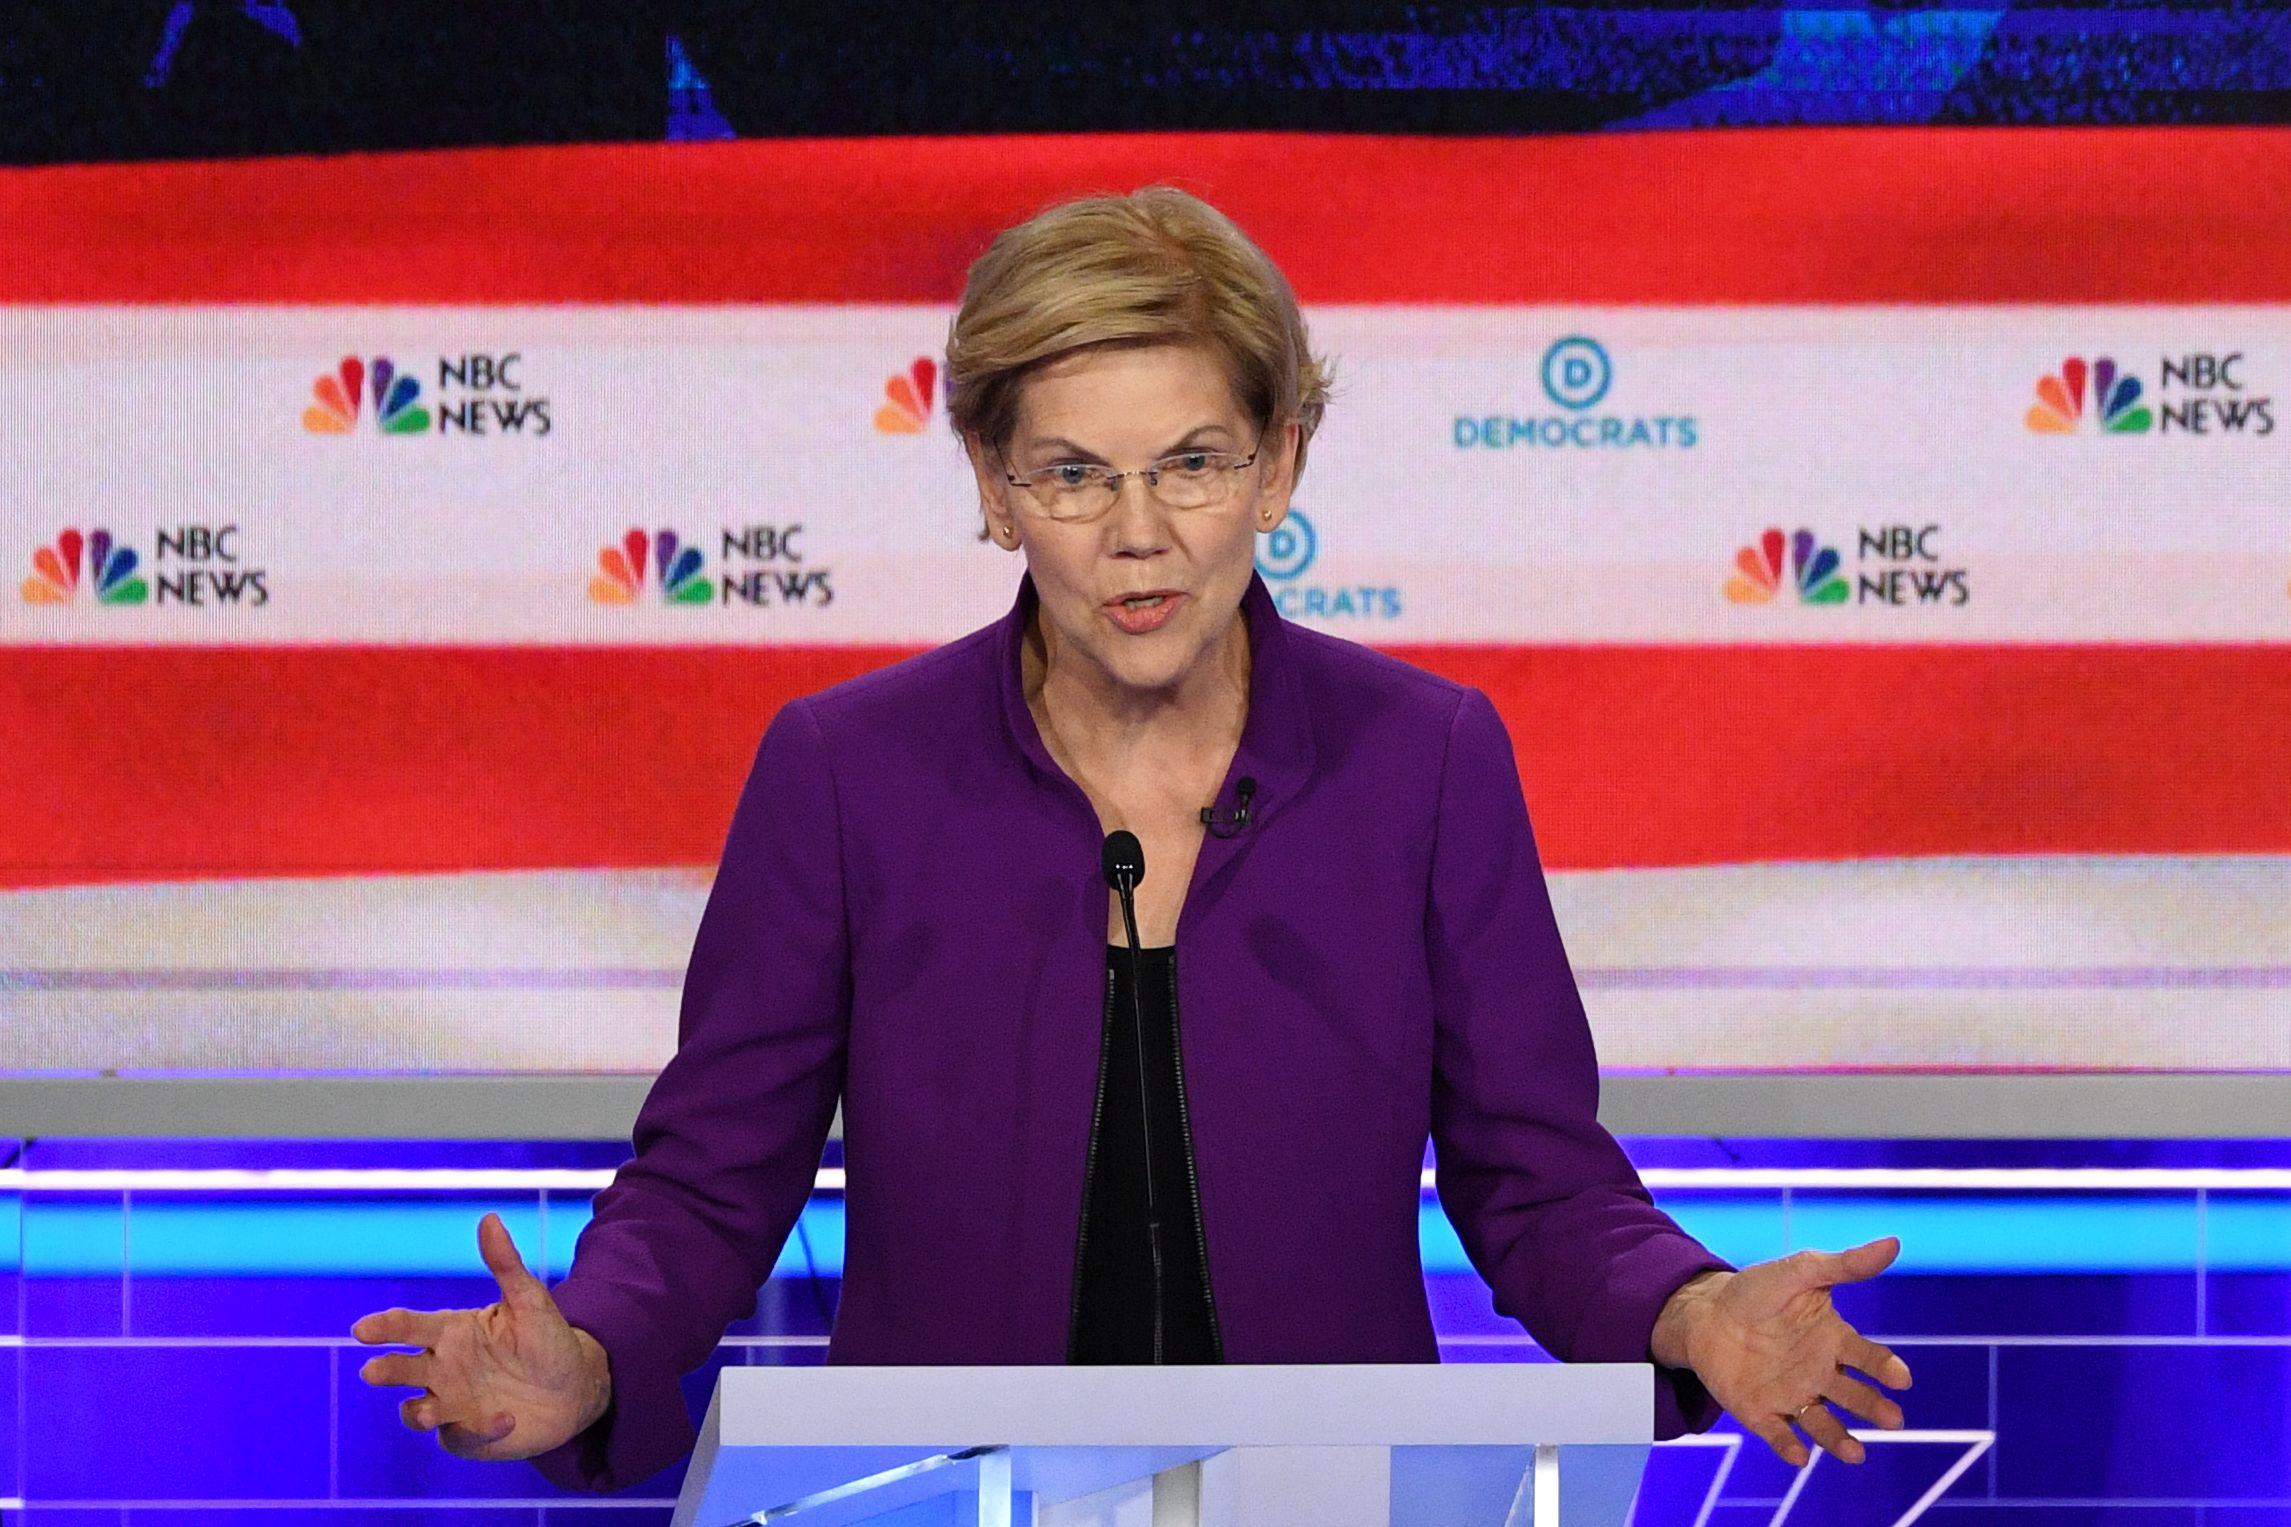 PHOTO: Elizabeth Warren participates in the first Democratic primary debate hosted by NBC News at the Adrienne Arsht Center for the Performing Arts in Miami, Florida, June 26, 2019.